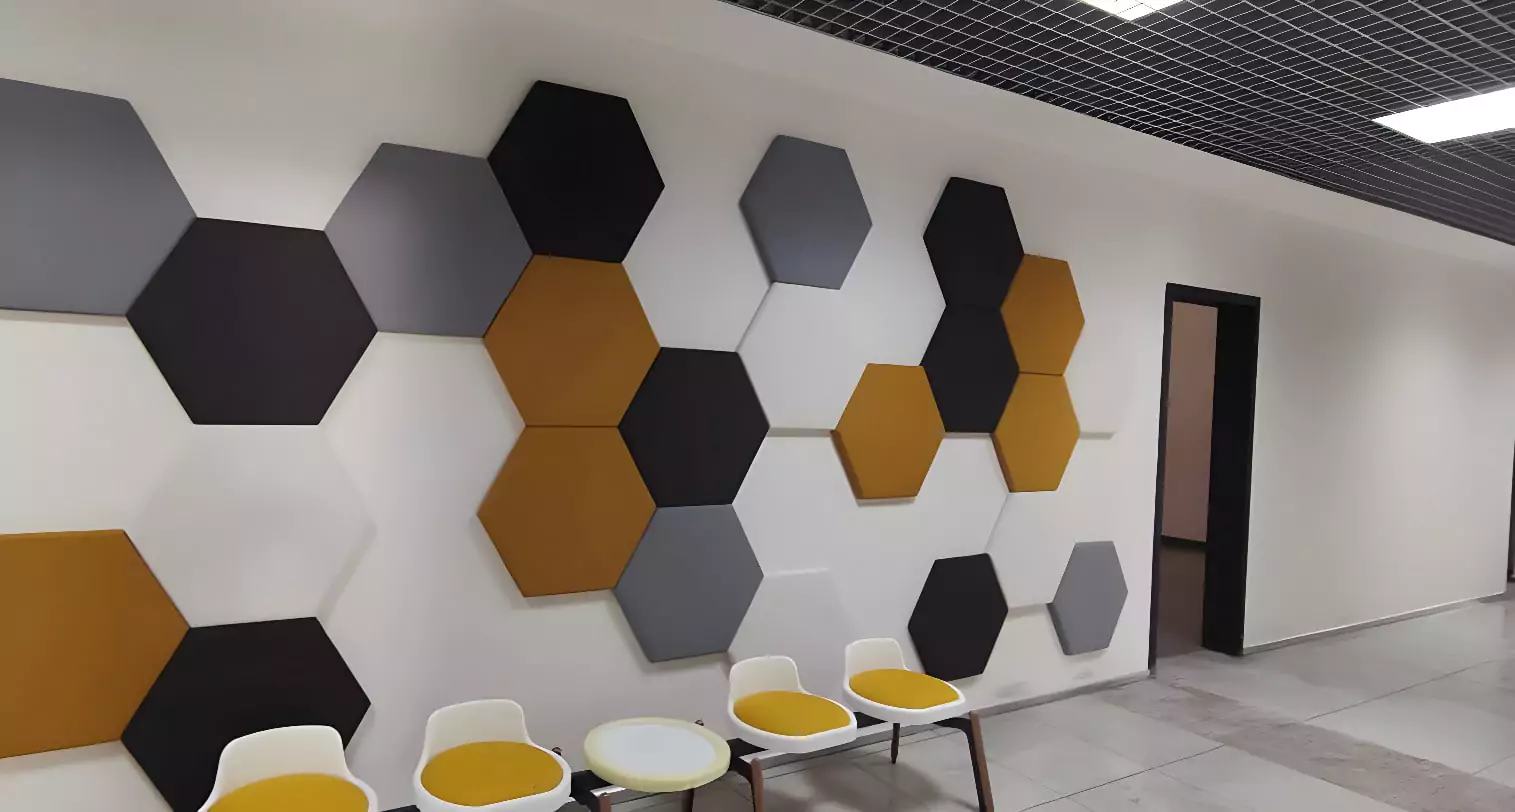 Acoustic Panel Projects - Monseat